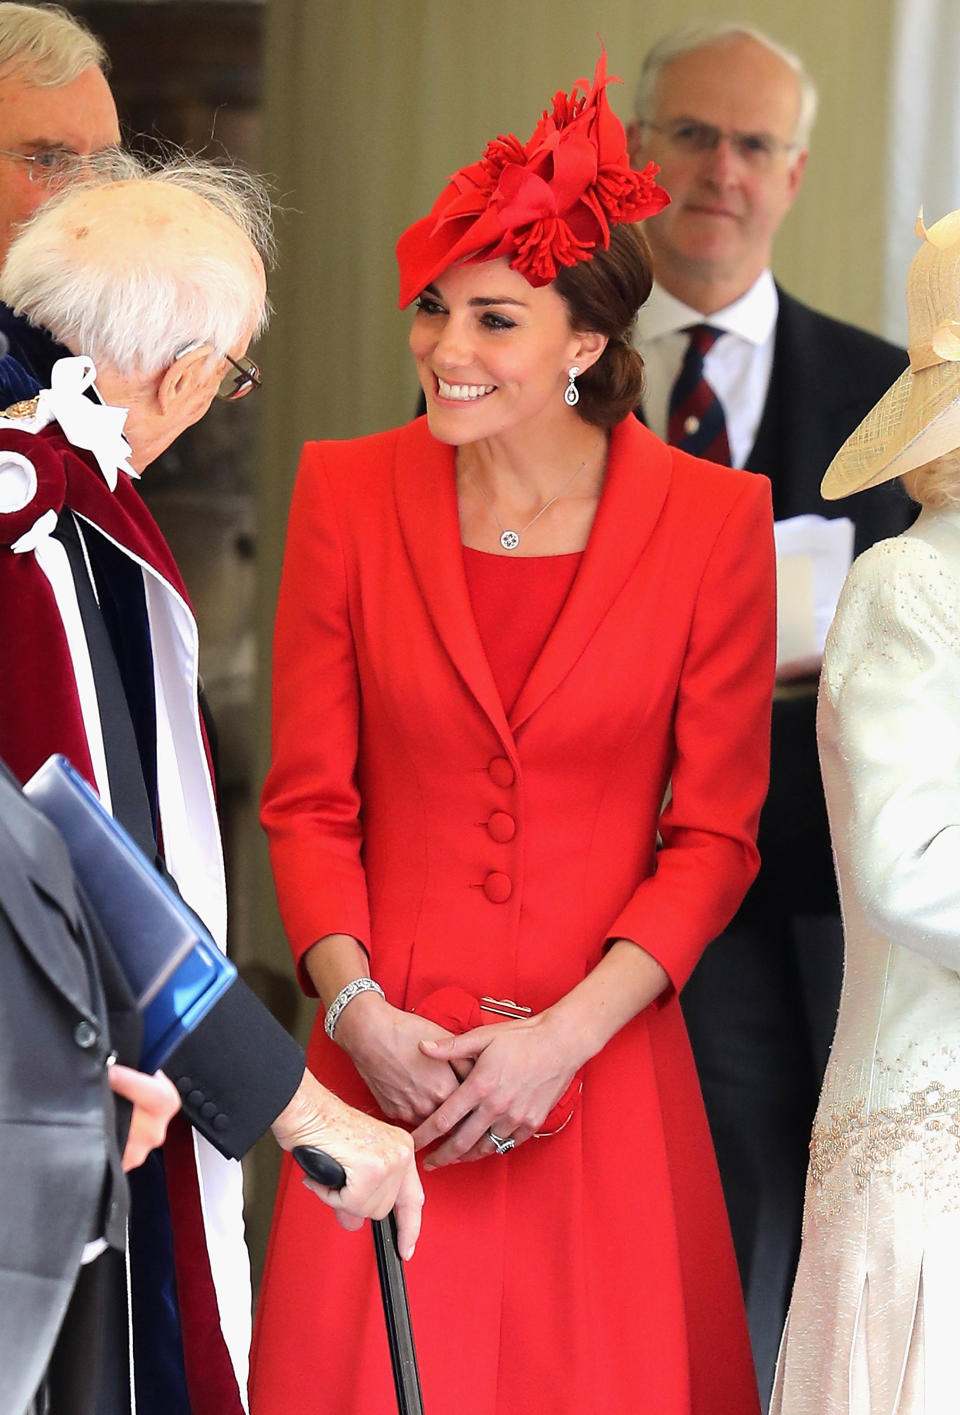 The Duchess of Cambridge talks to guests after attending the annual Order of the Garter Service at St George's Chapel, Windsor Castle.